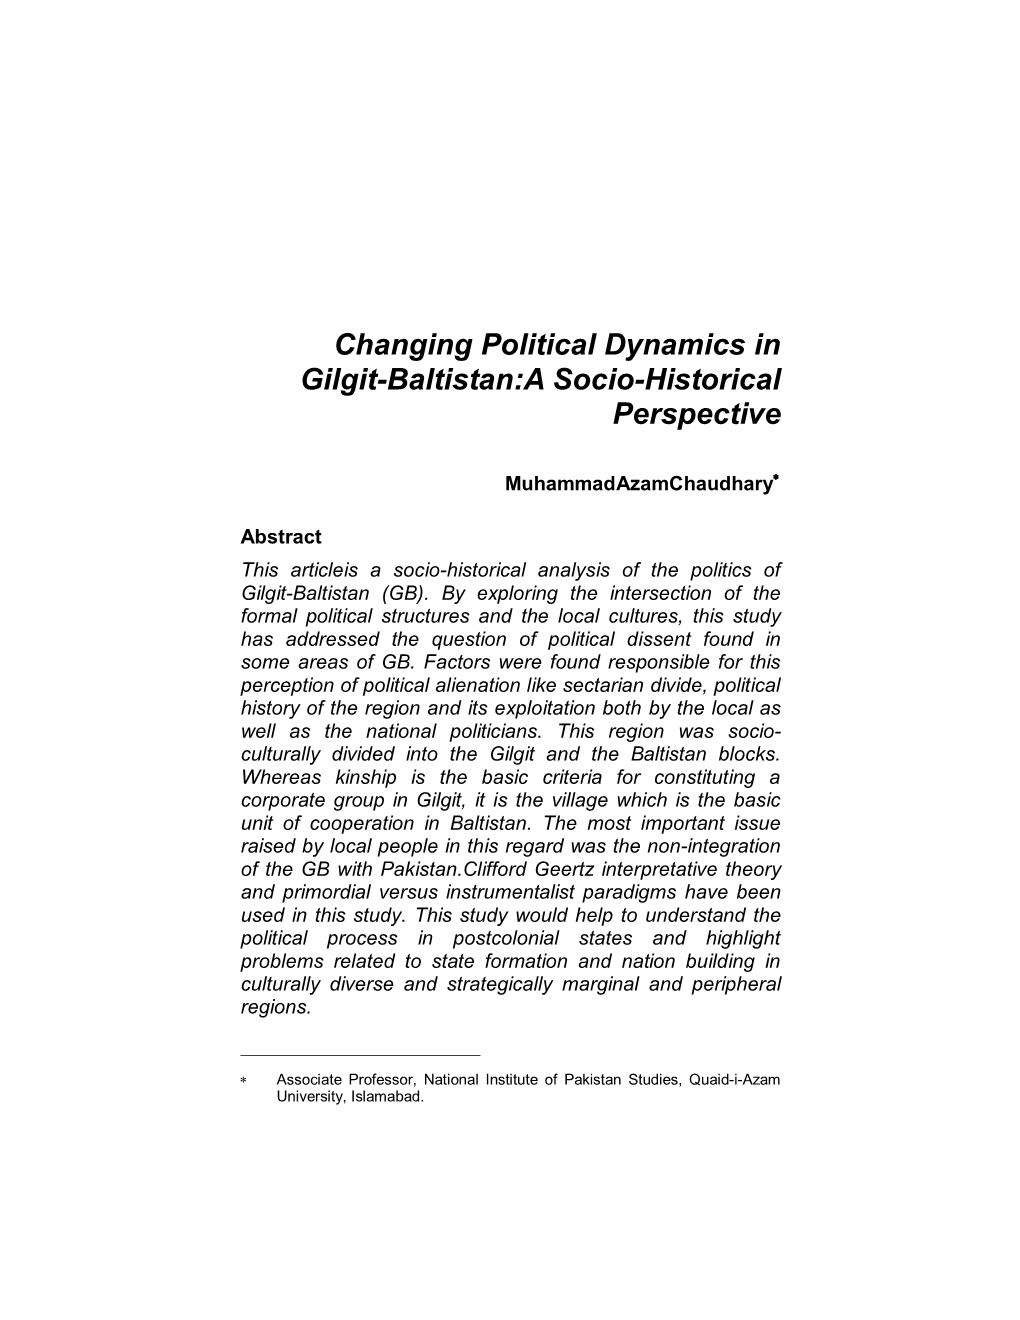 Changing Political Dynamics in Gilgit-Baltistan:A Socio-Historical Perspective